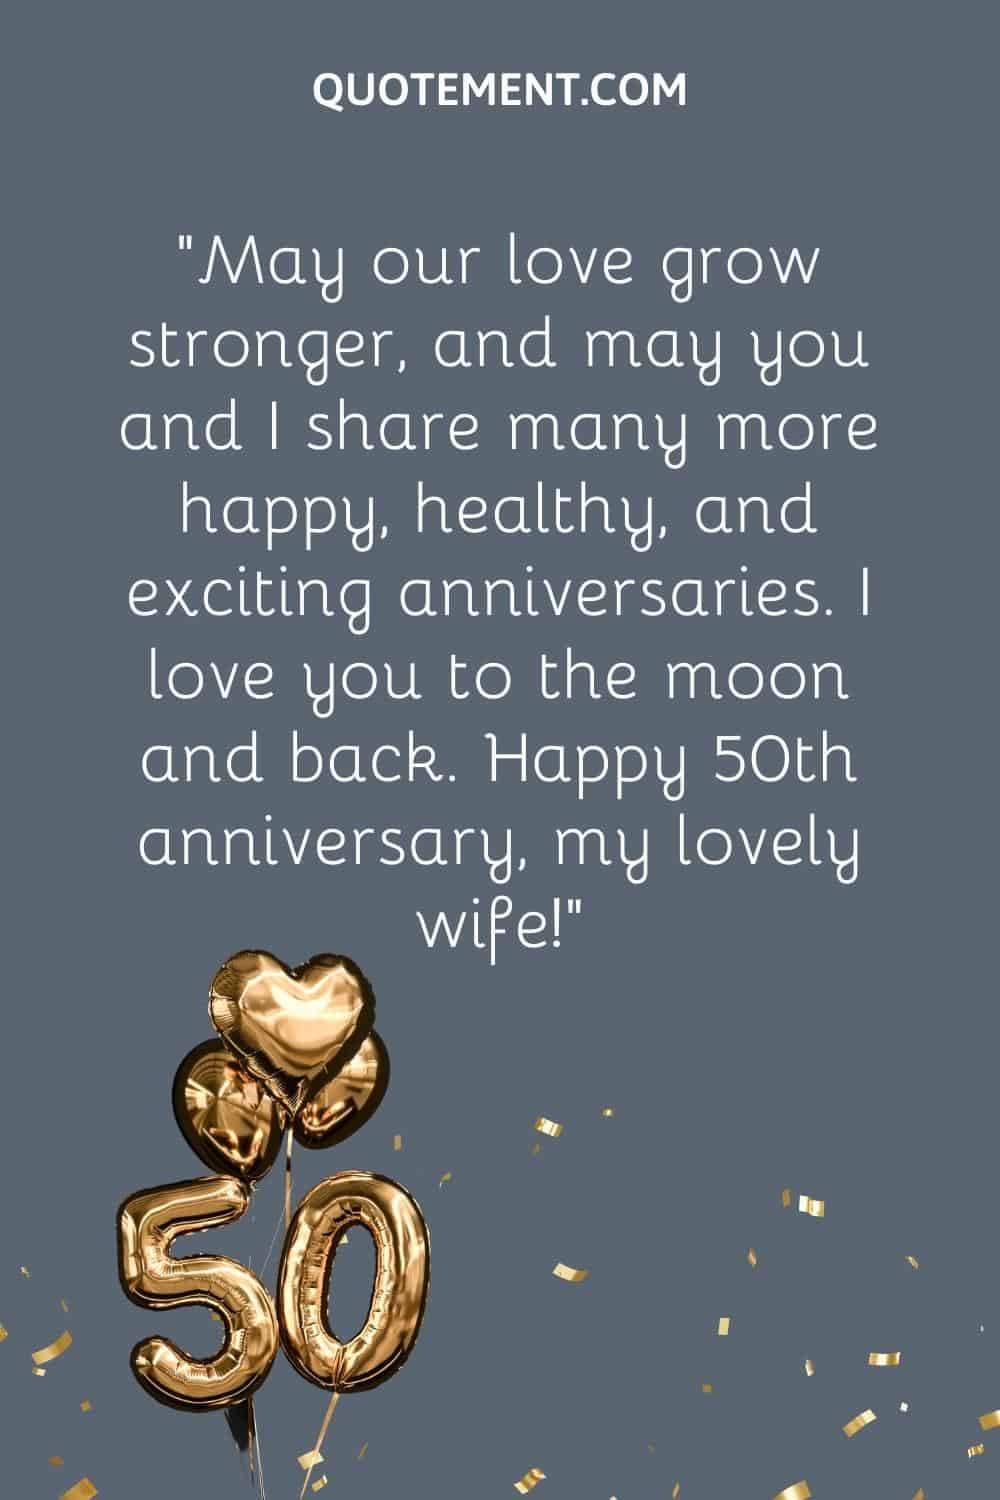 “May our love grow stronger, and may you and I share many more happy, healthy, and exciting anniversaries. I love you to the moon and back. Happy 50th anniversary, my lovely wife!”